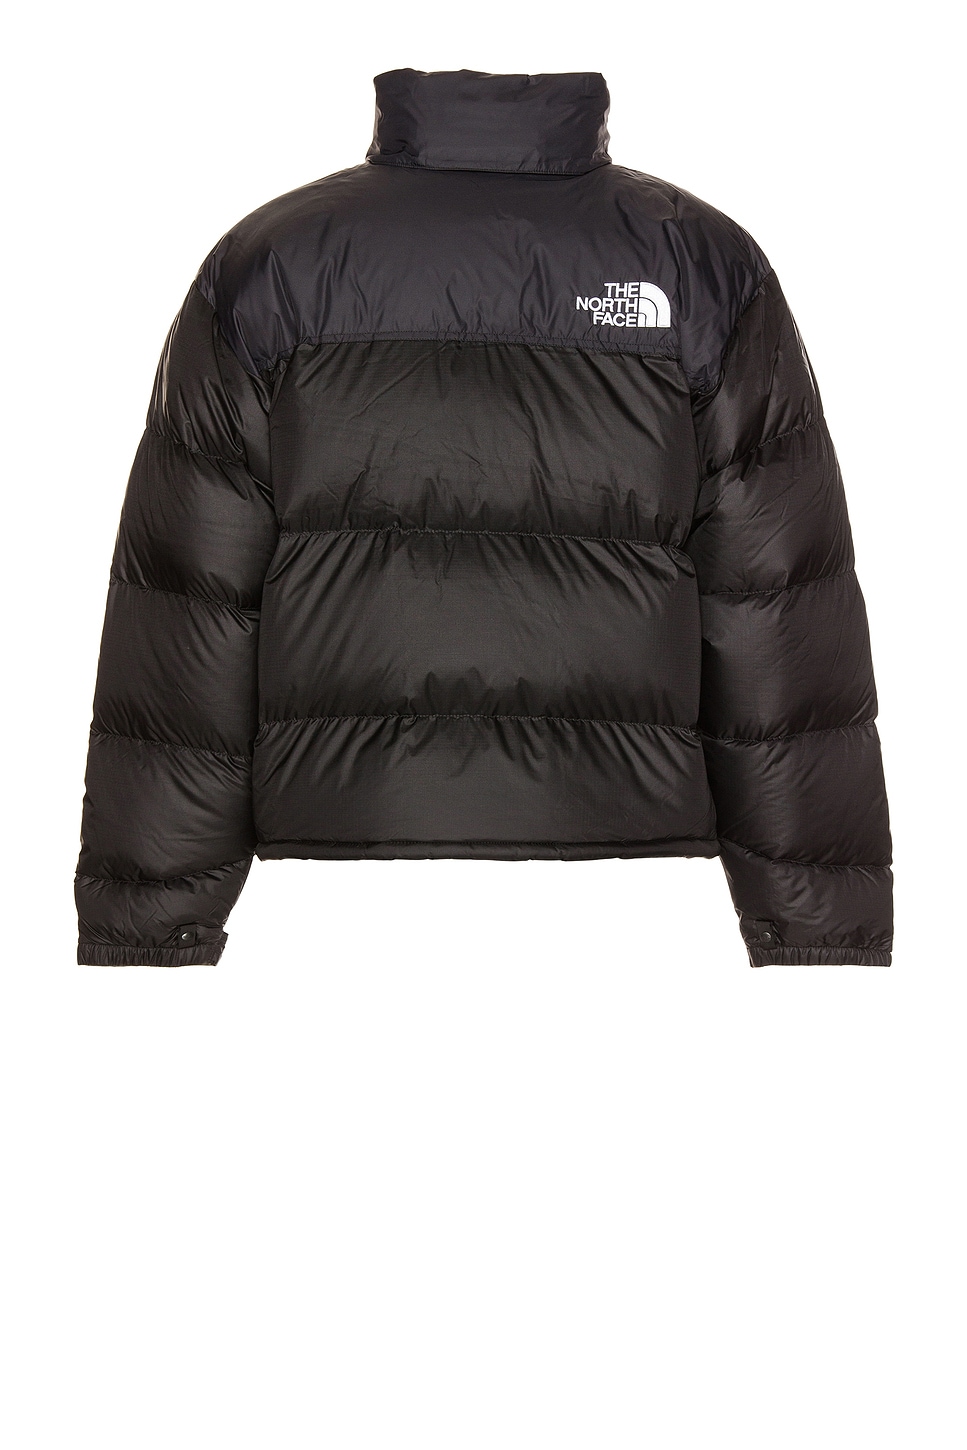 The North Face 1996 Retro Nuptse Jacket in Recycled TNF Black | FWRD